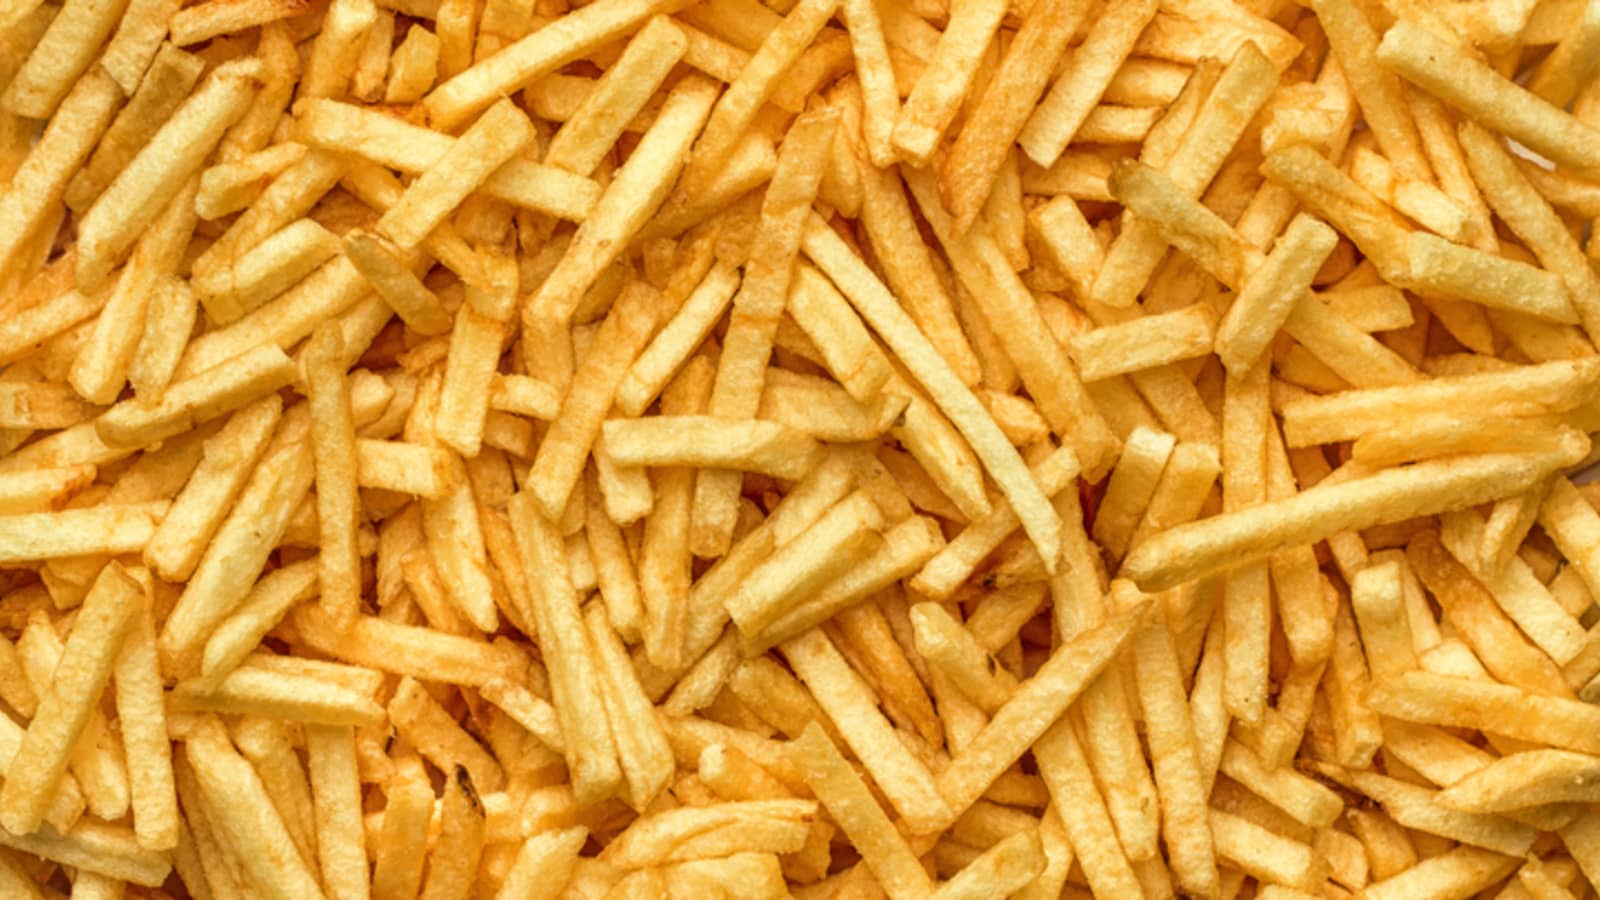 A french fry shortage could be coming after weak potato harvest